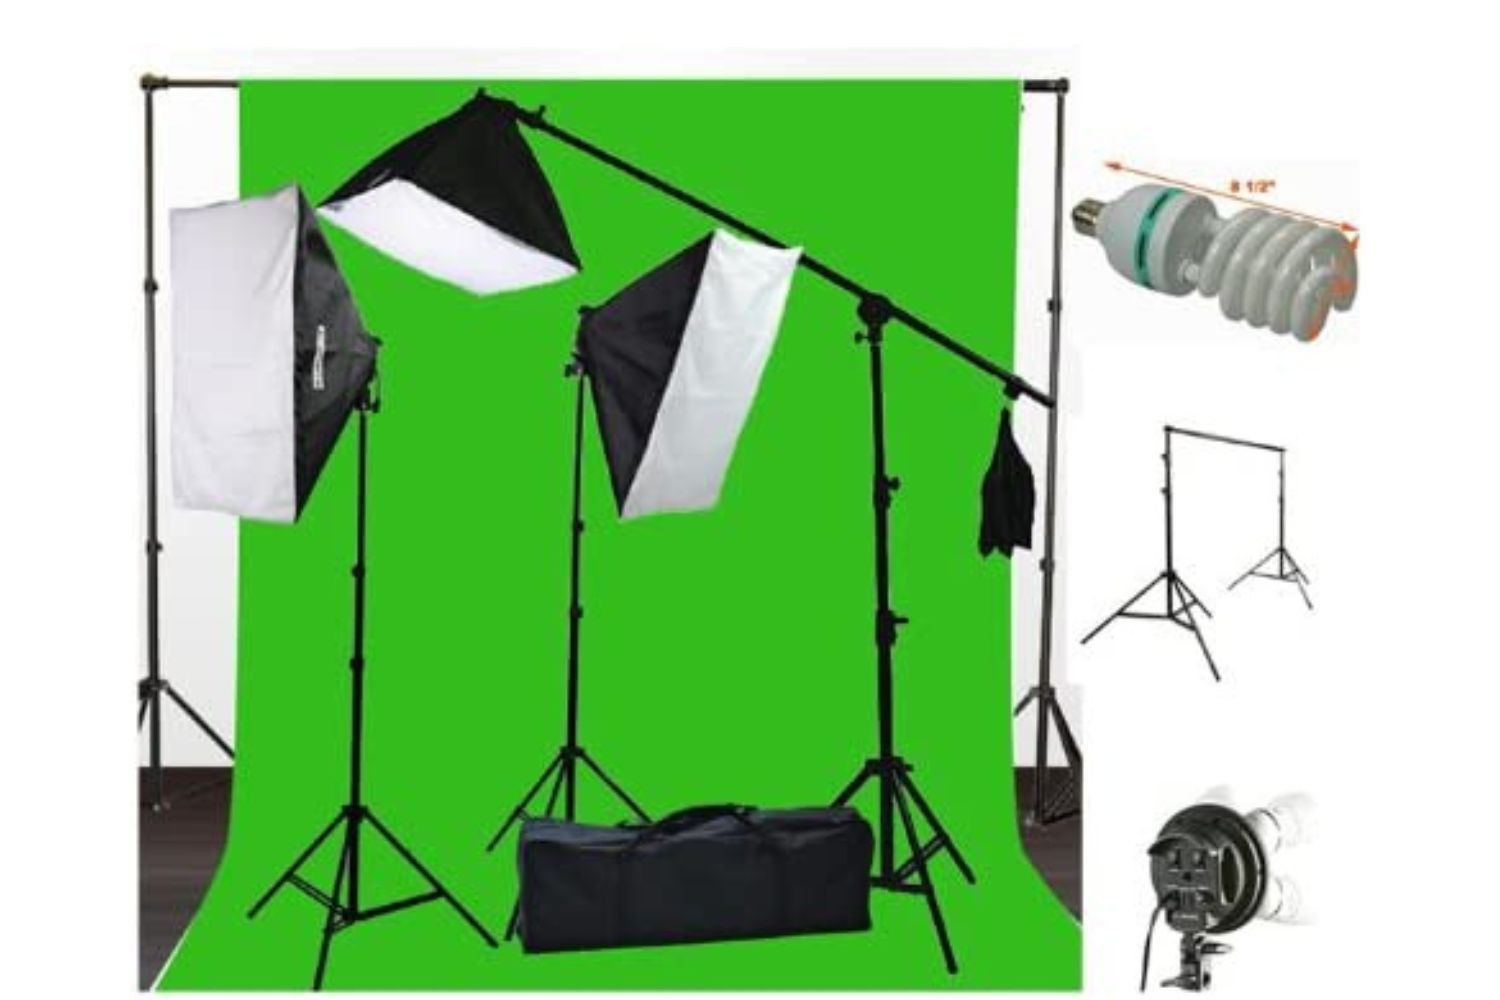 Green Screen Backdrop Comparison Guide: What's the Difference?